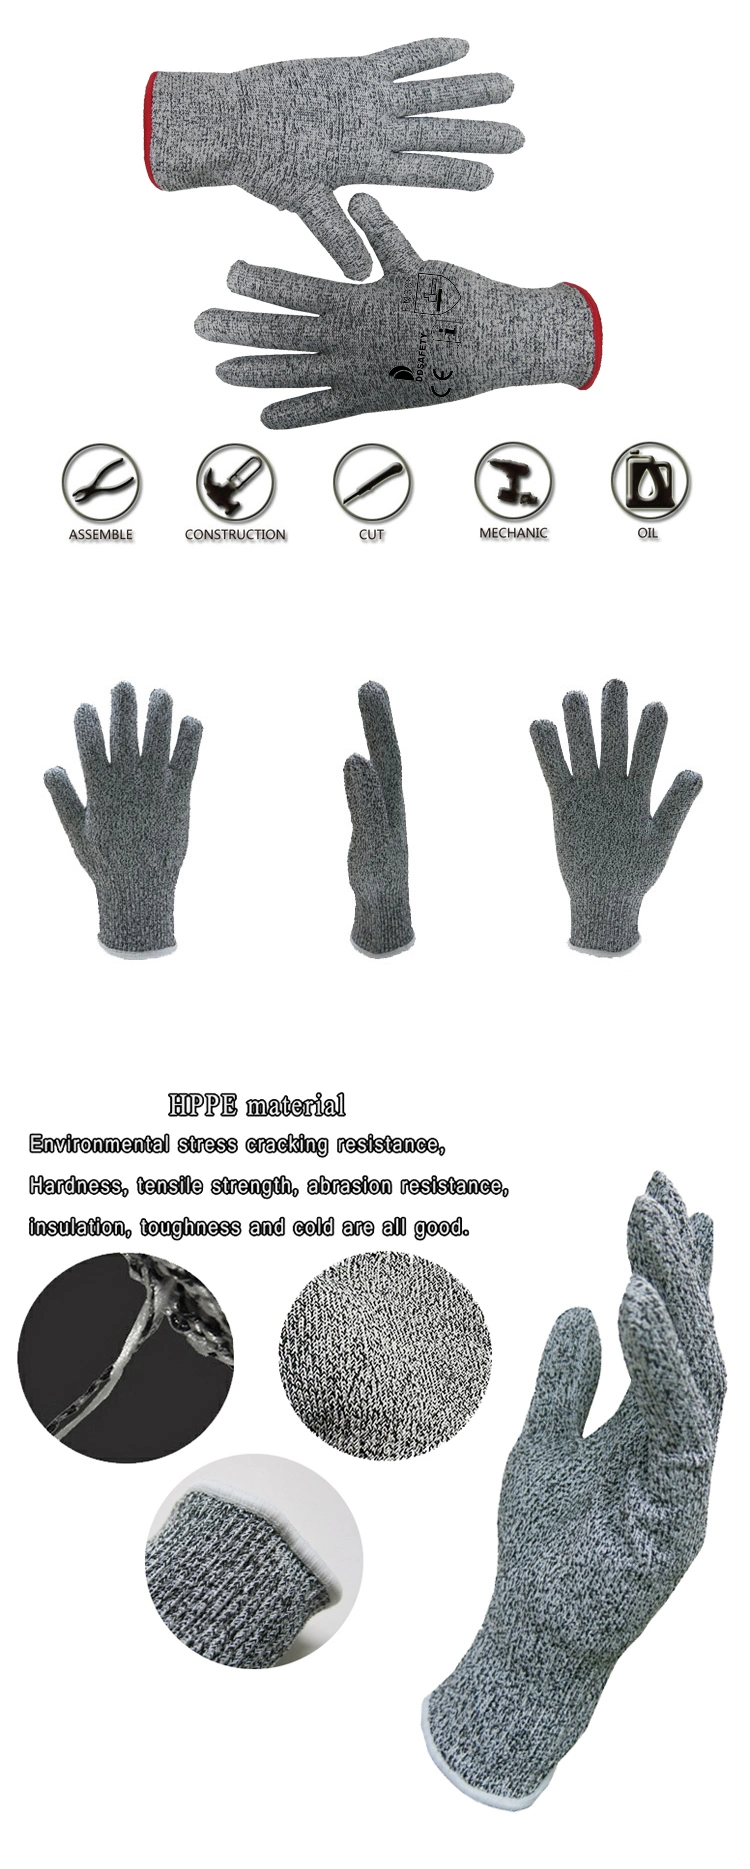 Best Selling Gray Cut Hand Protection Gloves